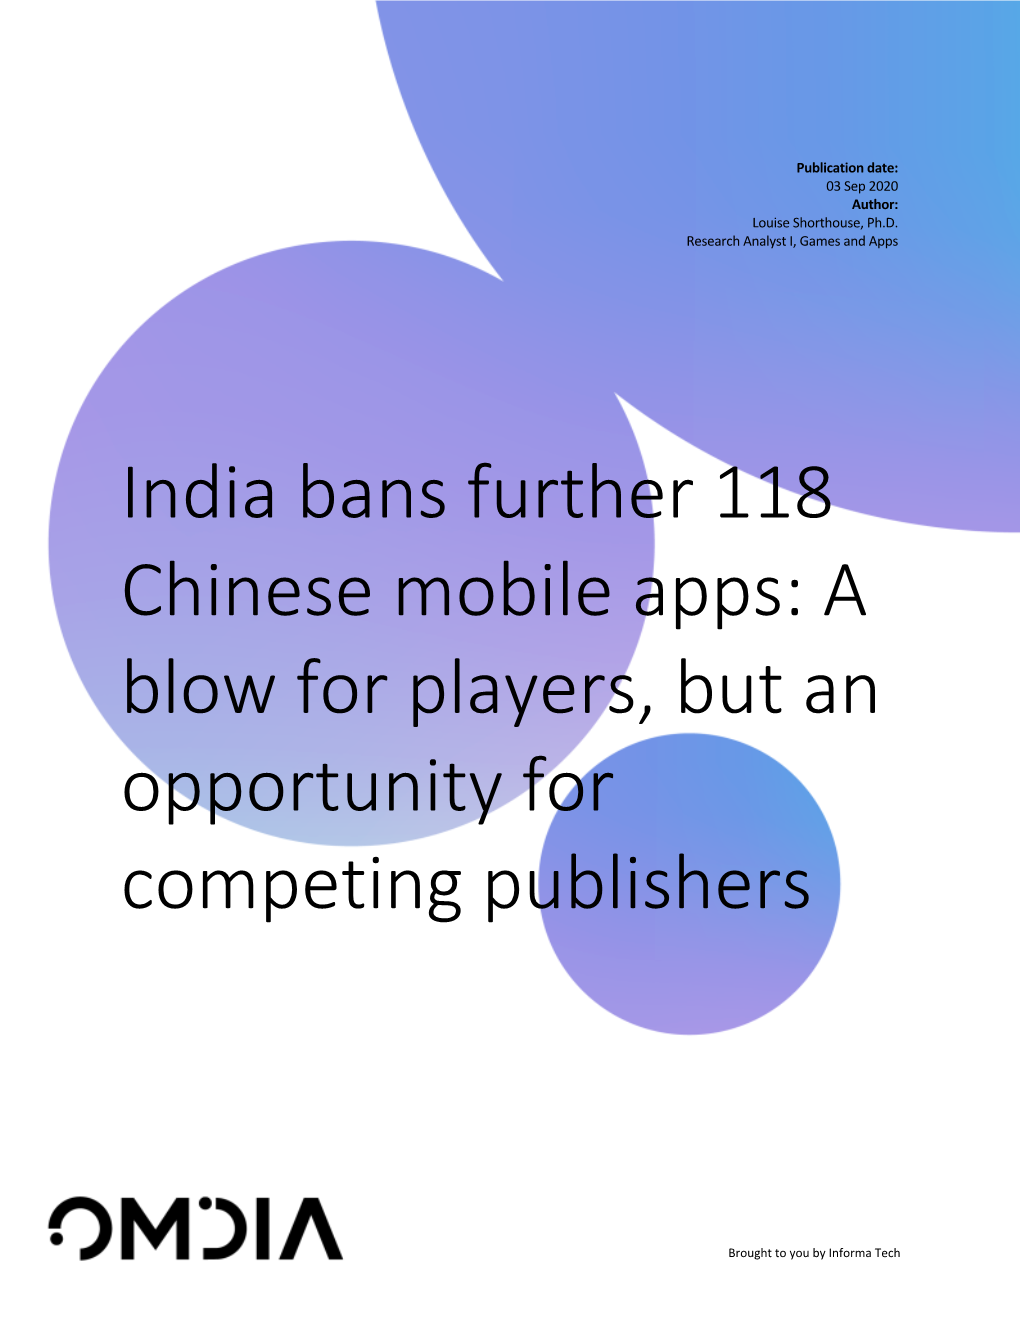 India Bans Further 118 Chinese Mobile Apps: a Blow for Players, but an Opportunity for Competing Publishers